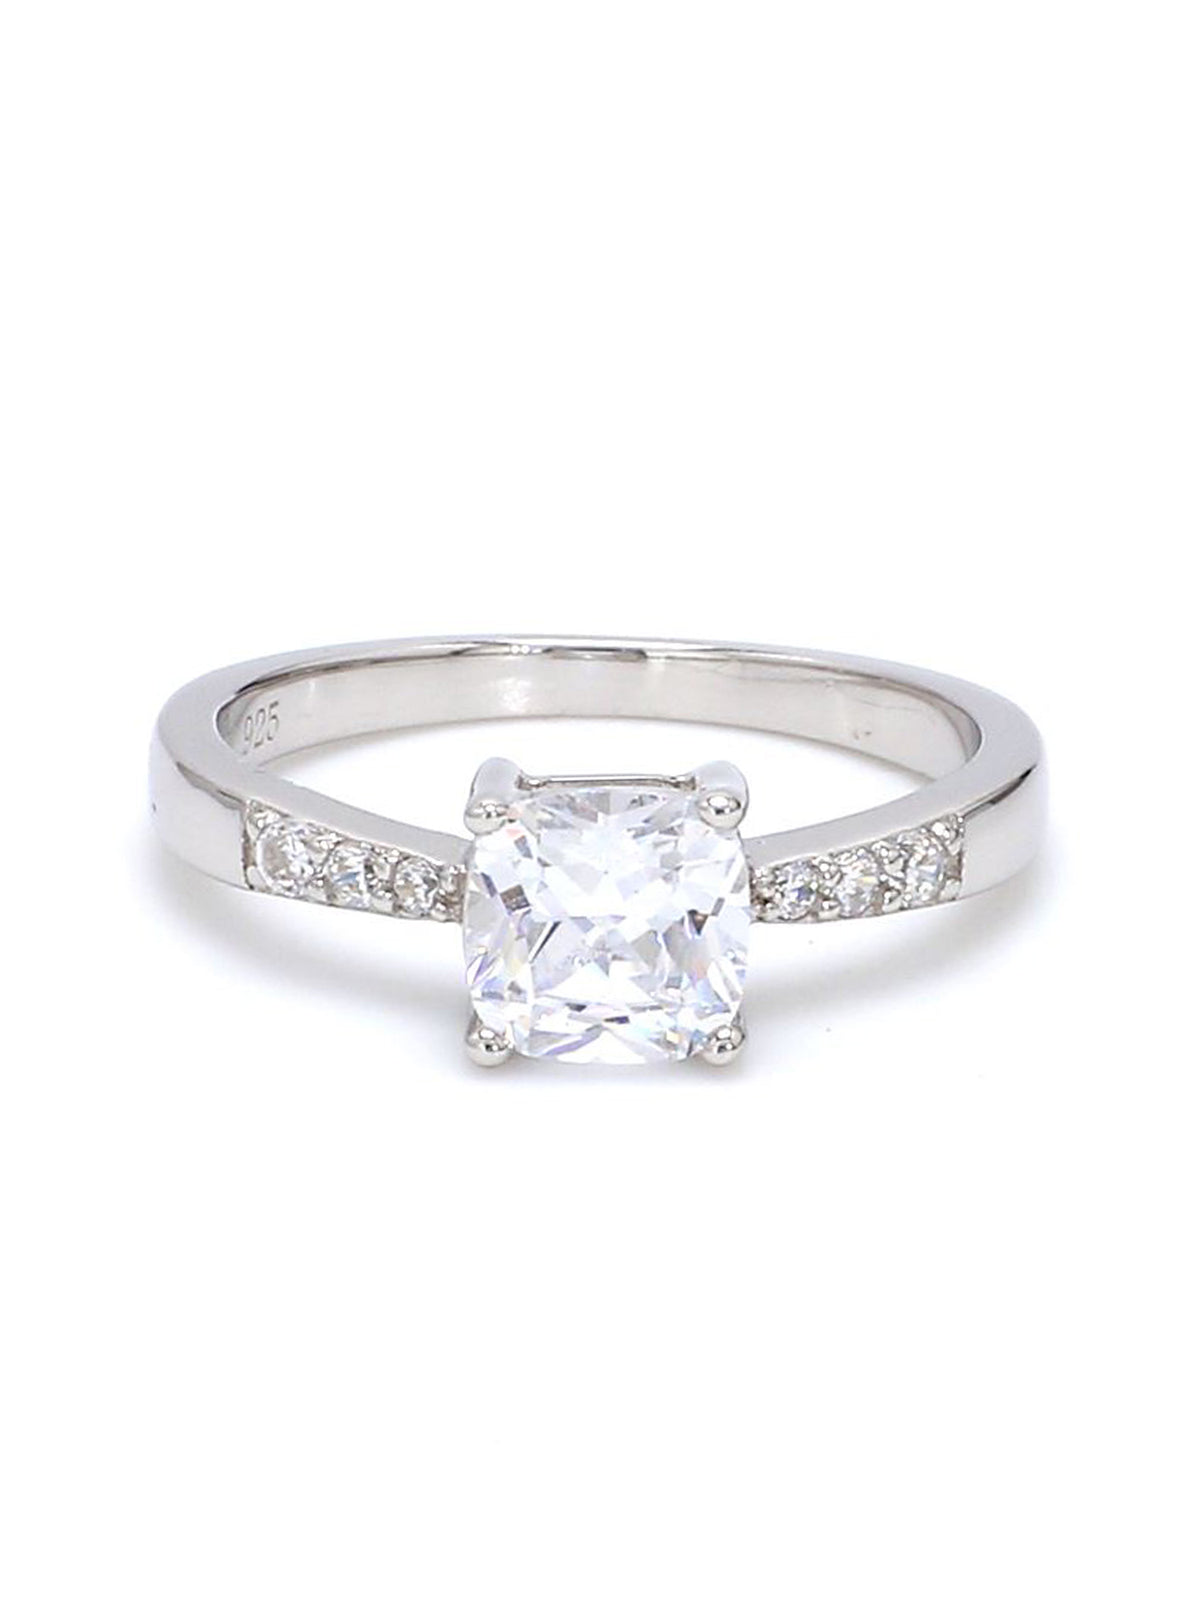 HAPPILY EVER AFTER 1 CARAT SOLITAIRE RING-1